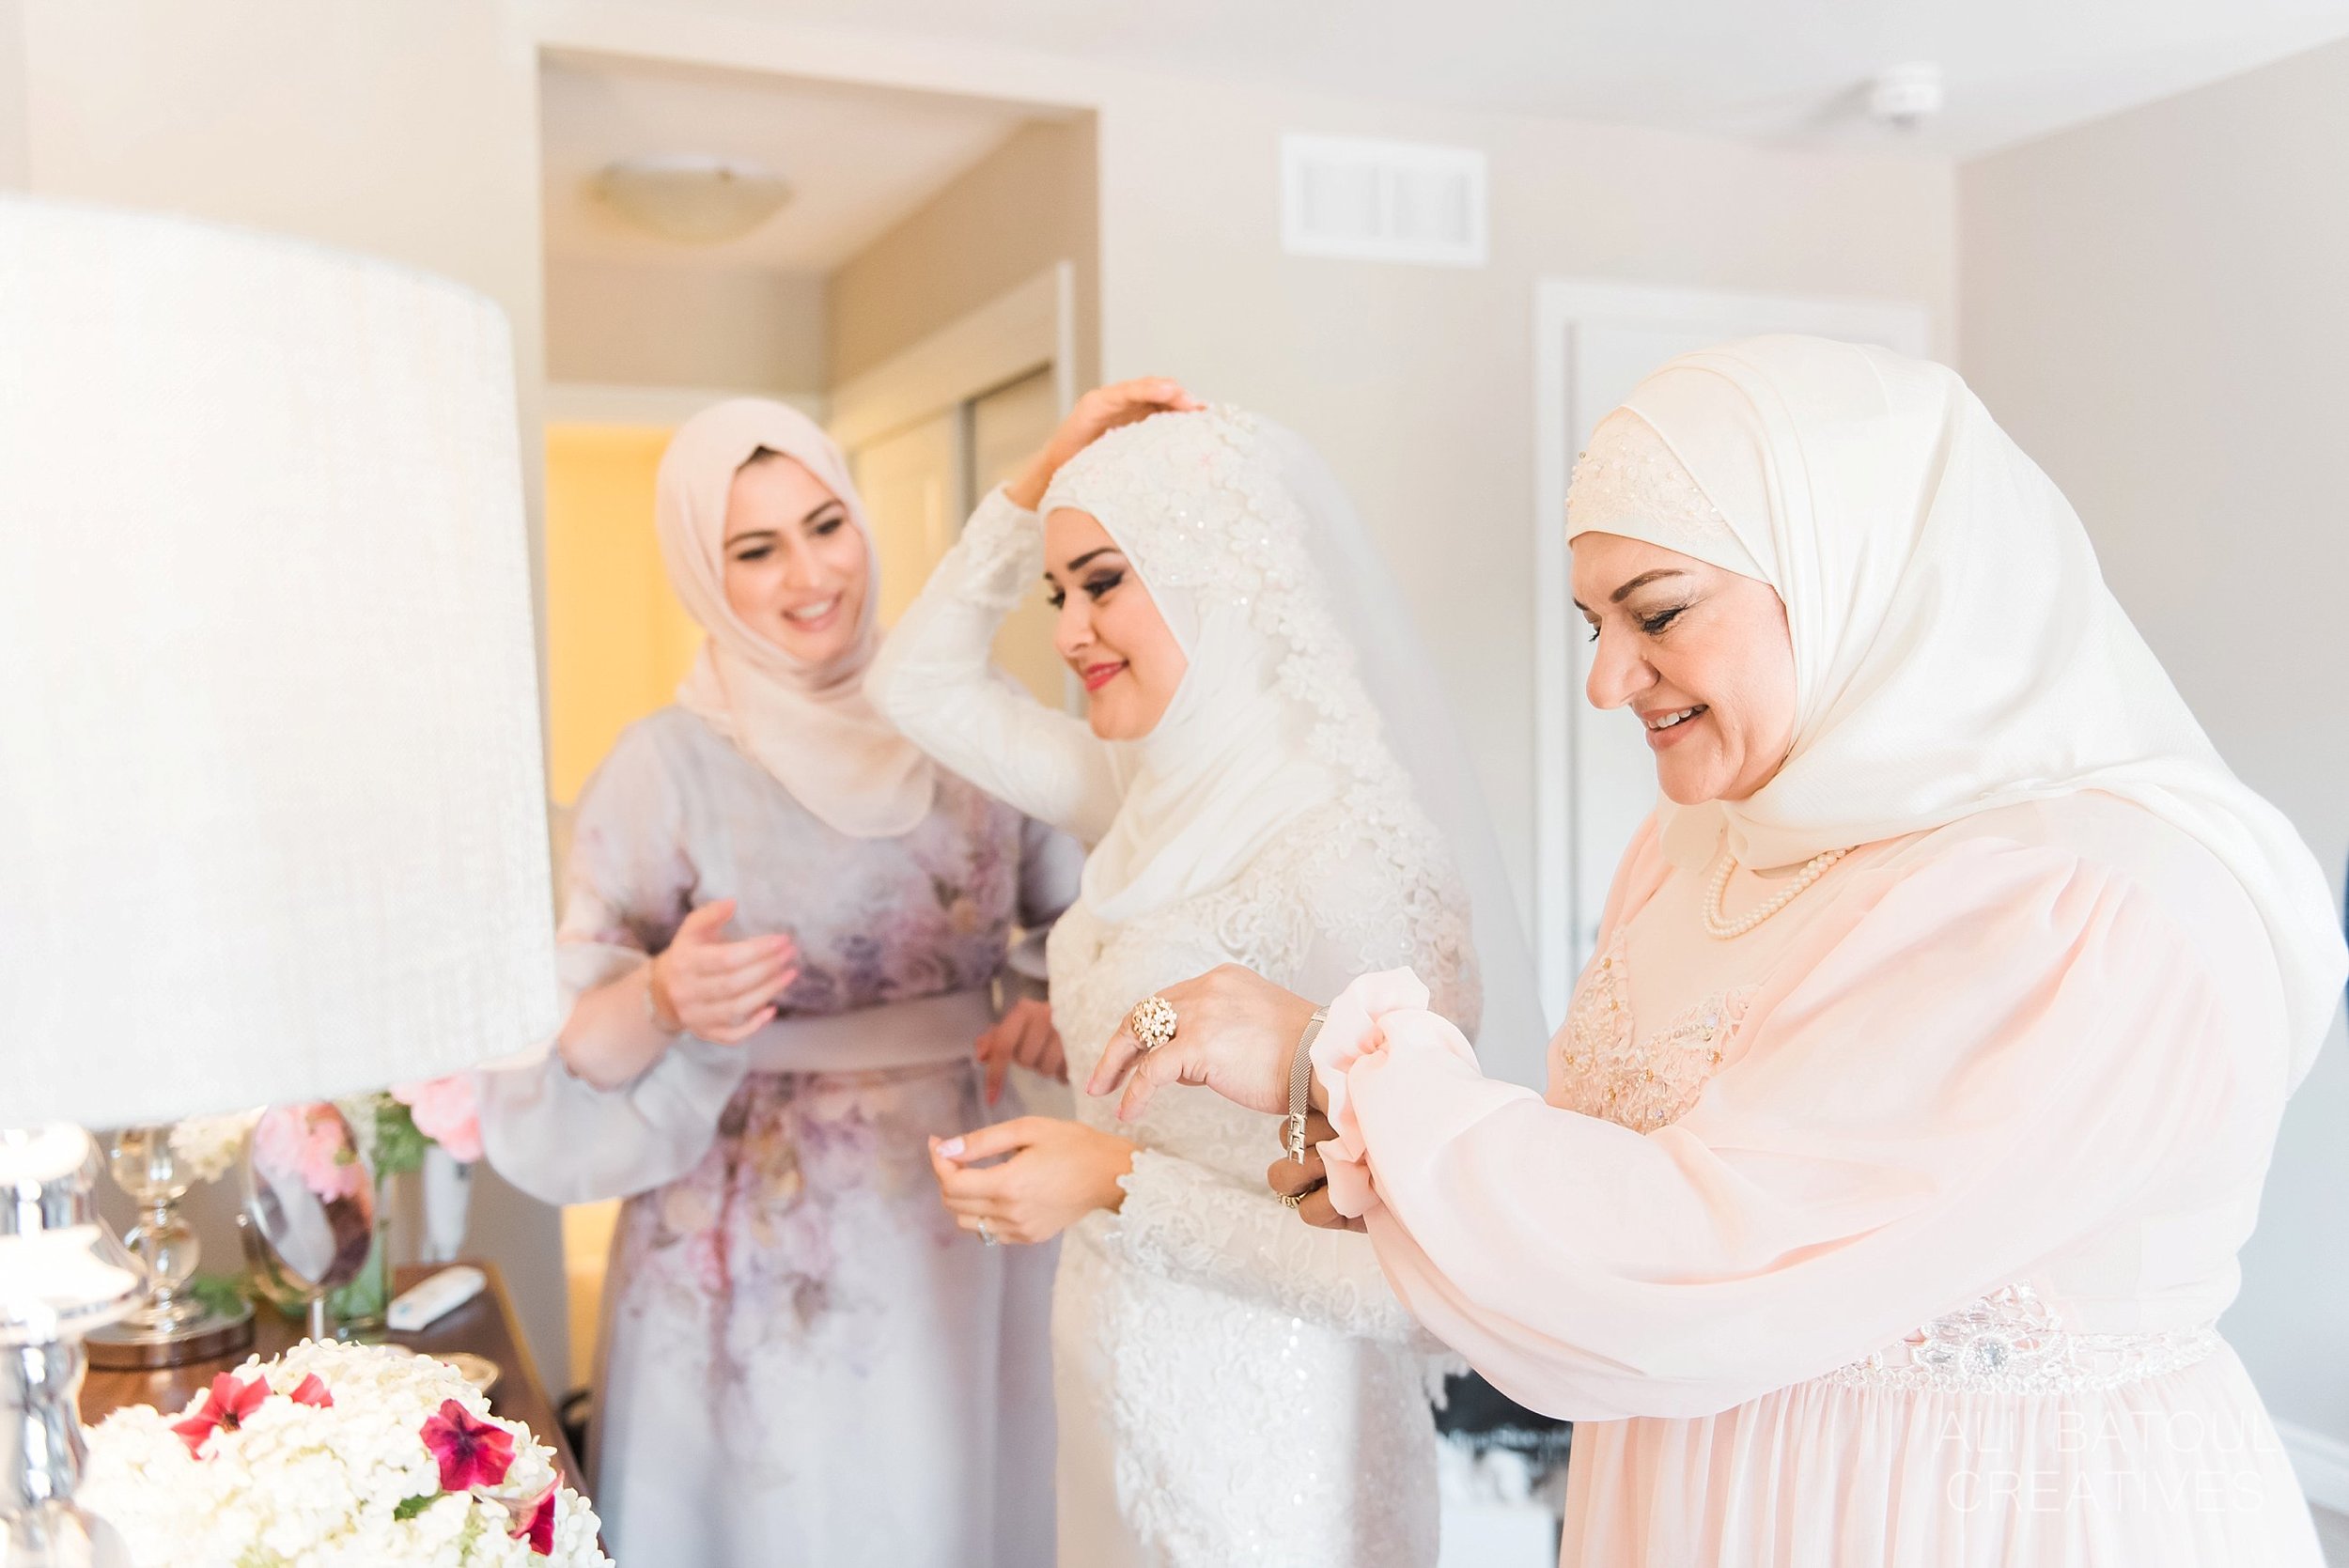  Hanan's mother and best friend helped her get ready for the big day. 